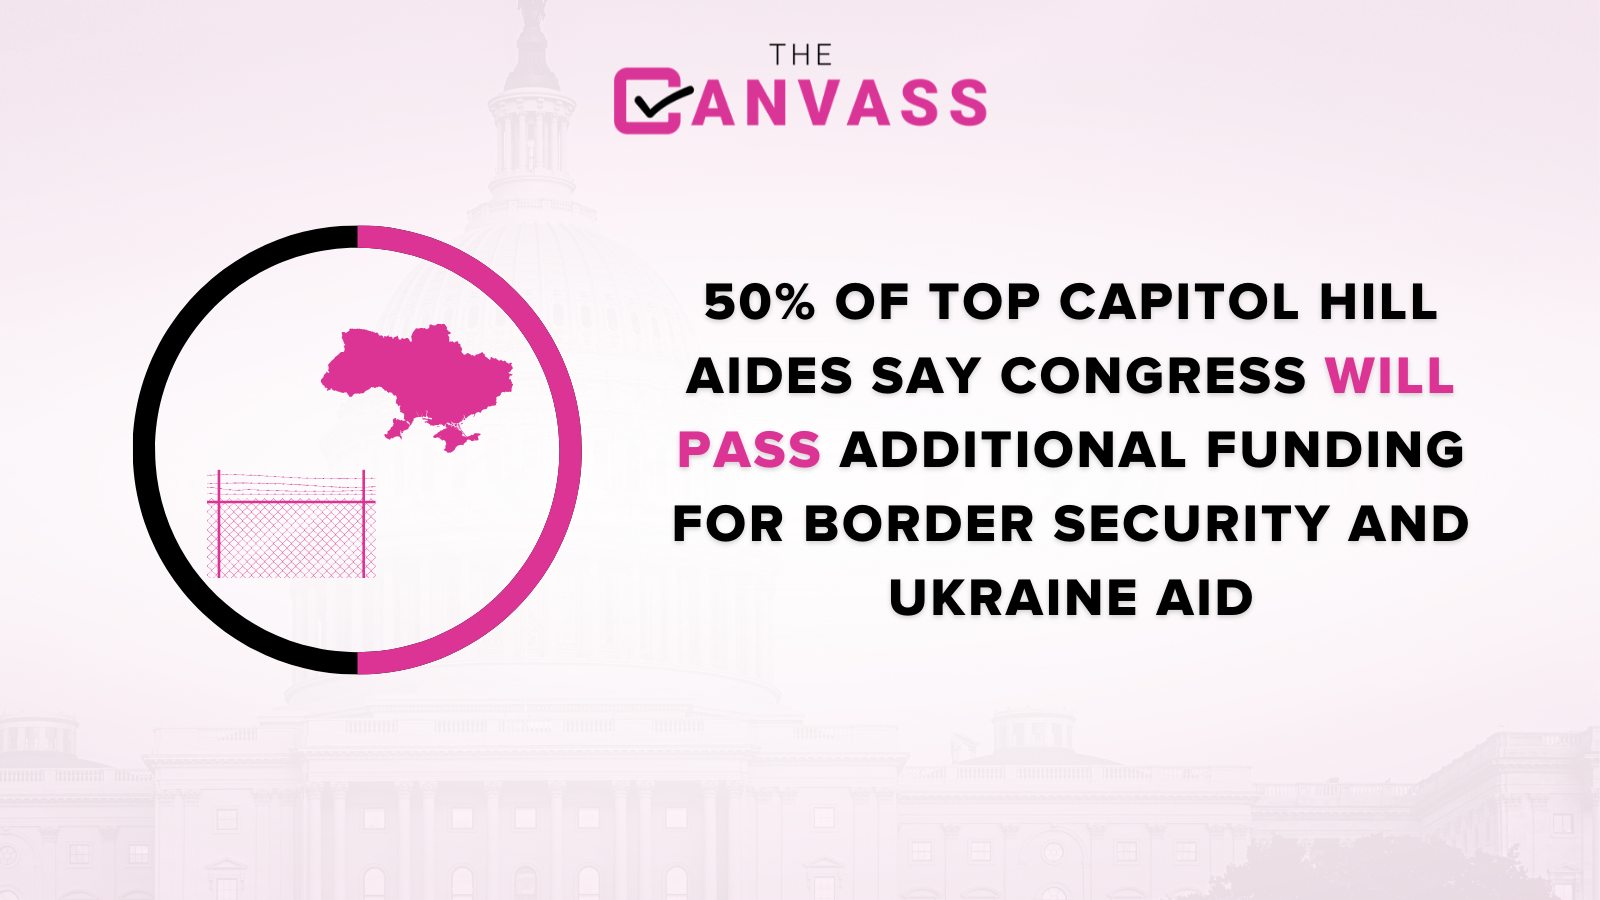 50% of top Capitol Hill aids say Congress will pass additional funding for border security and Ukraine aid